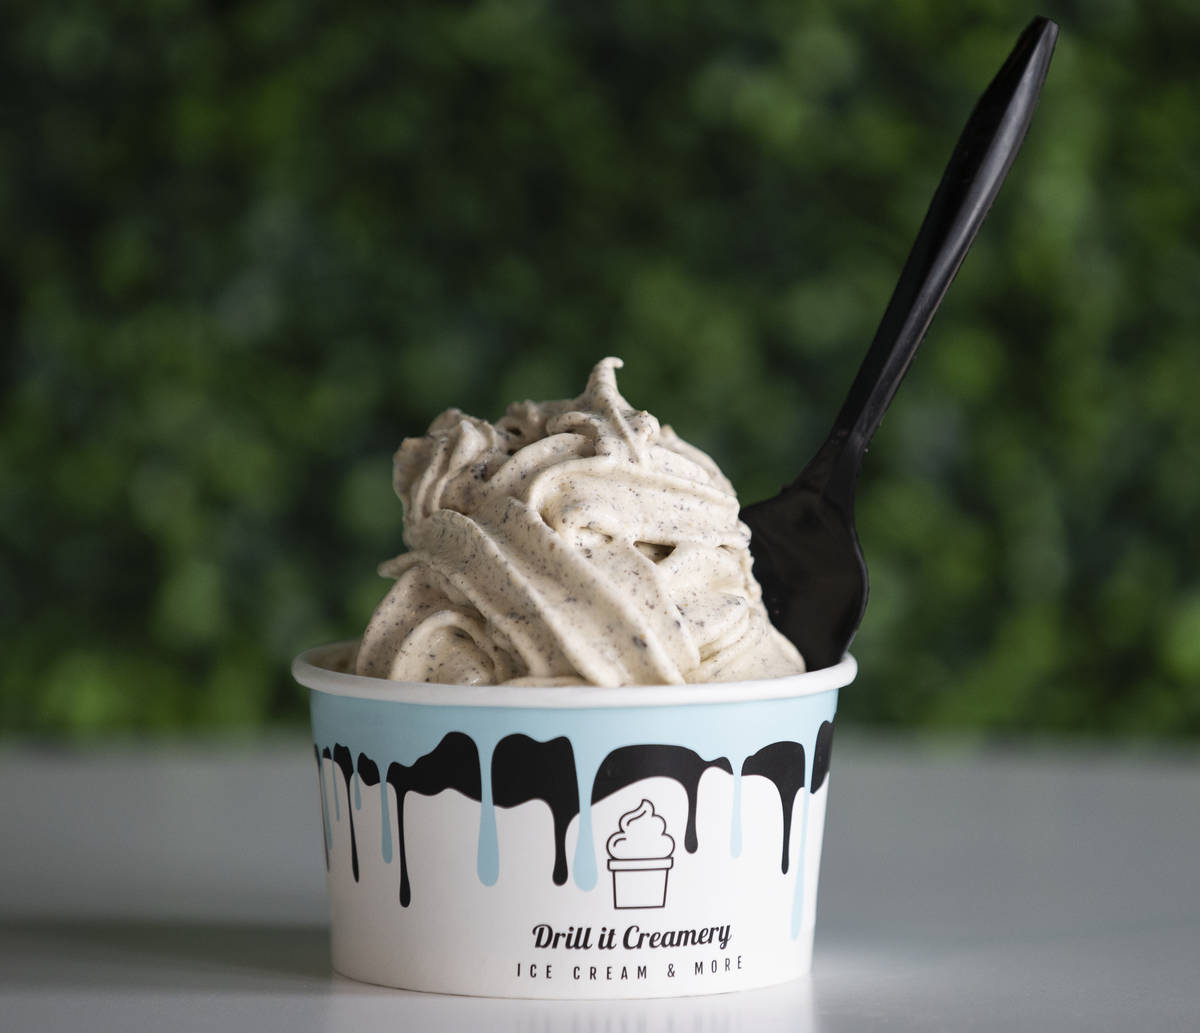 Cinnamon Toast Crunch and Oreo's drilled swirl ice cream is displayed at Drill It Creamery in L ...